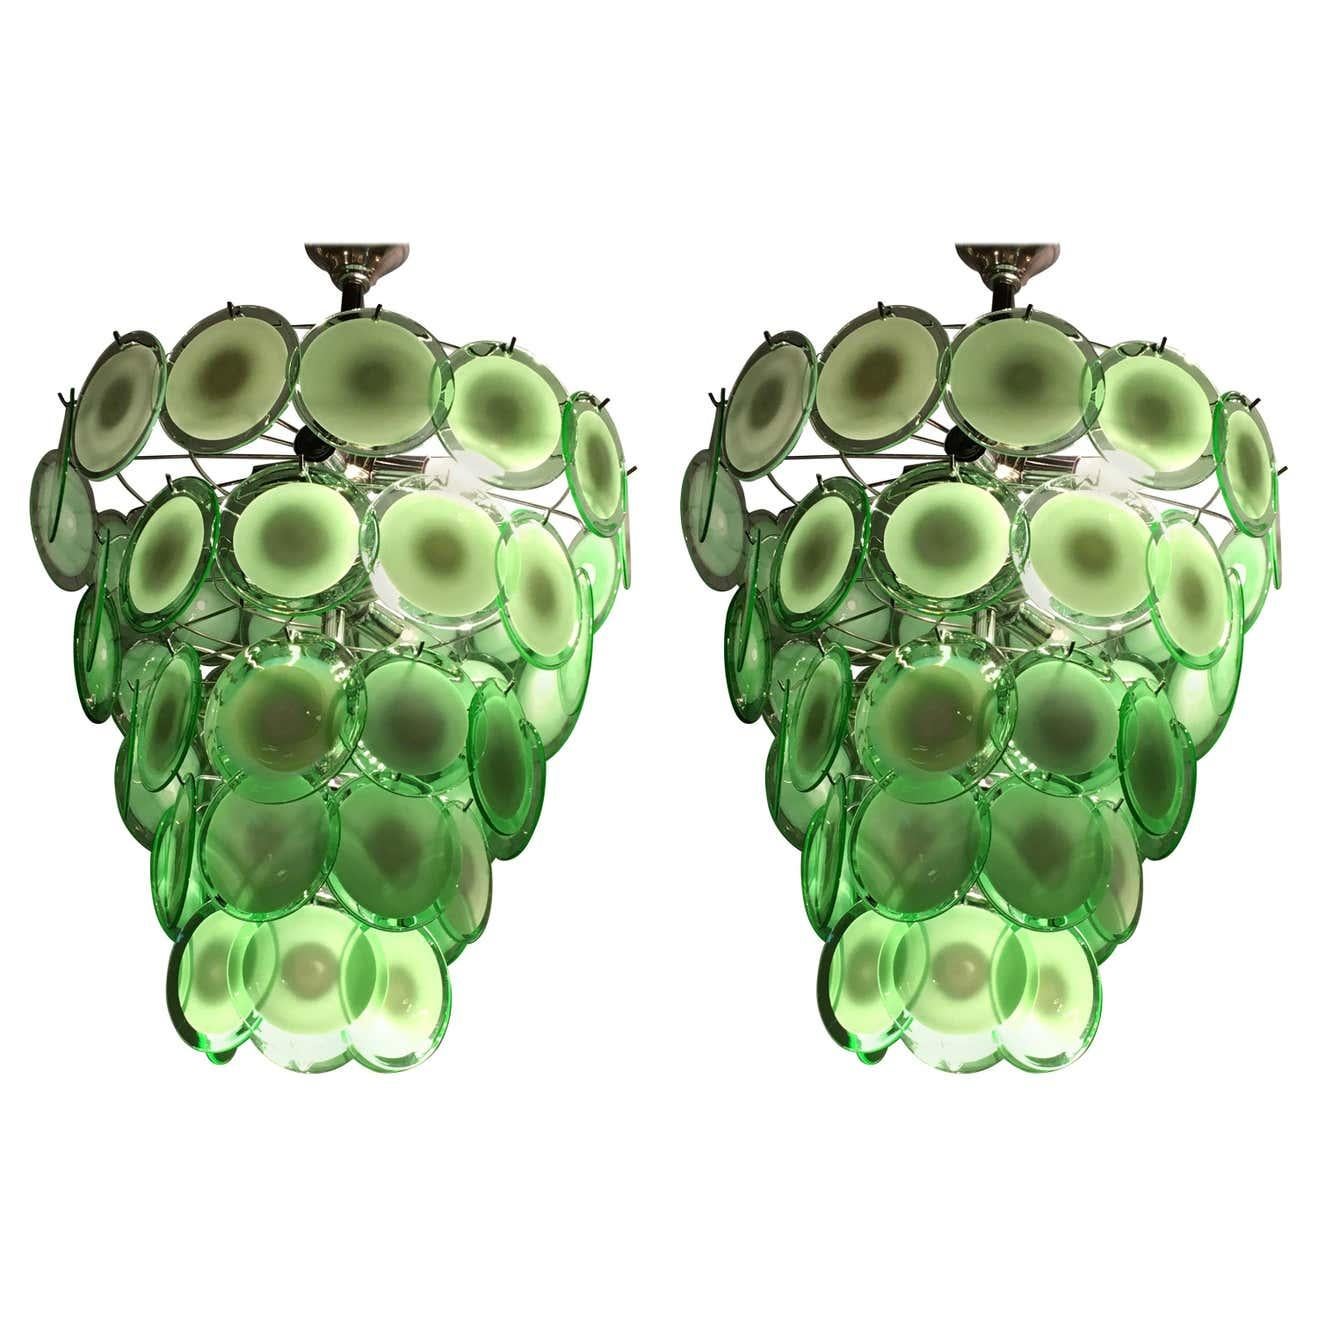 A pair of art deco style circular Murano glass sphere chandeliers. Each having fifty circular Murano glass spheres approximately six inches in diameter. This pair having mint green and white glass disks. We have recently acquired a warehouse which